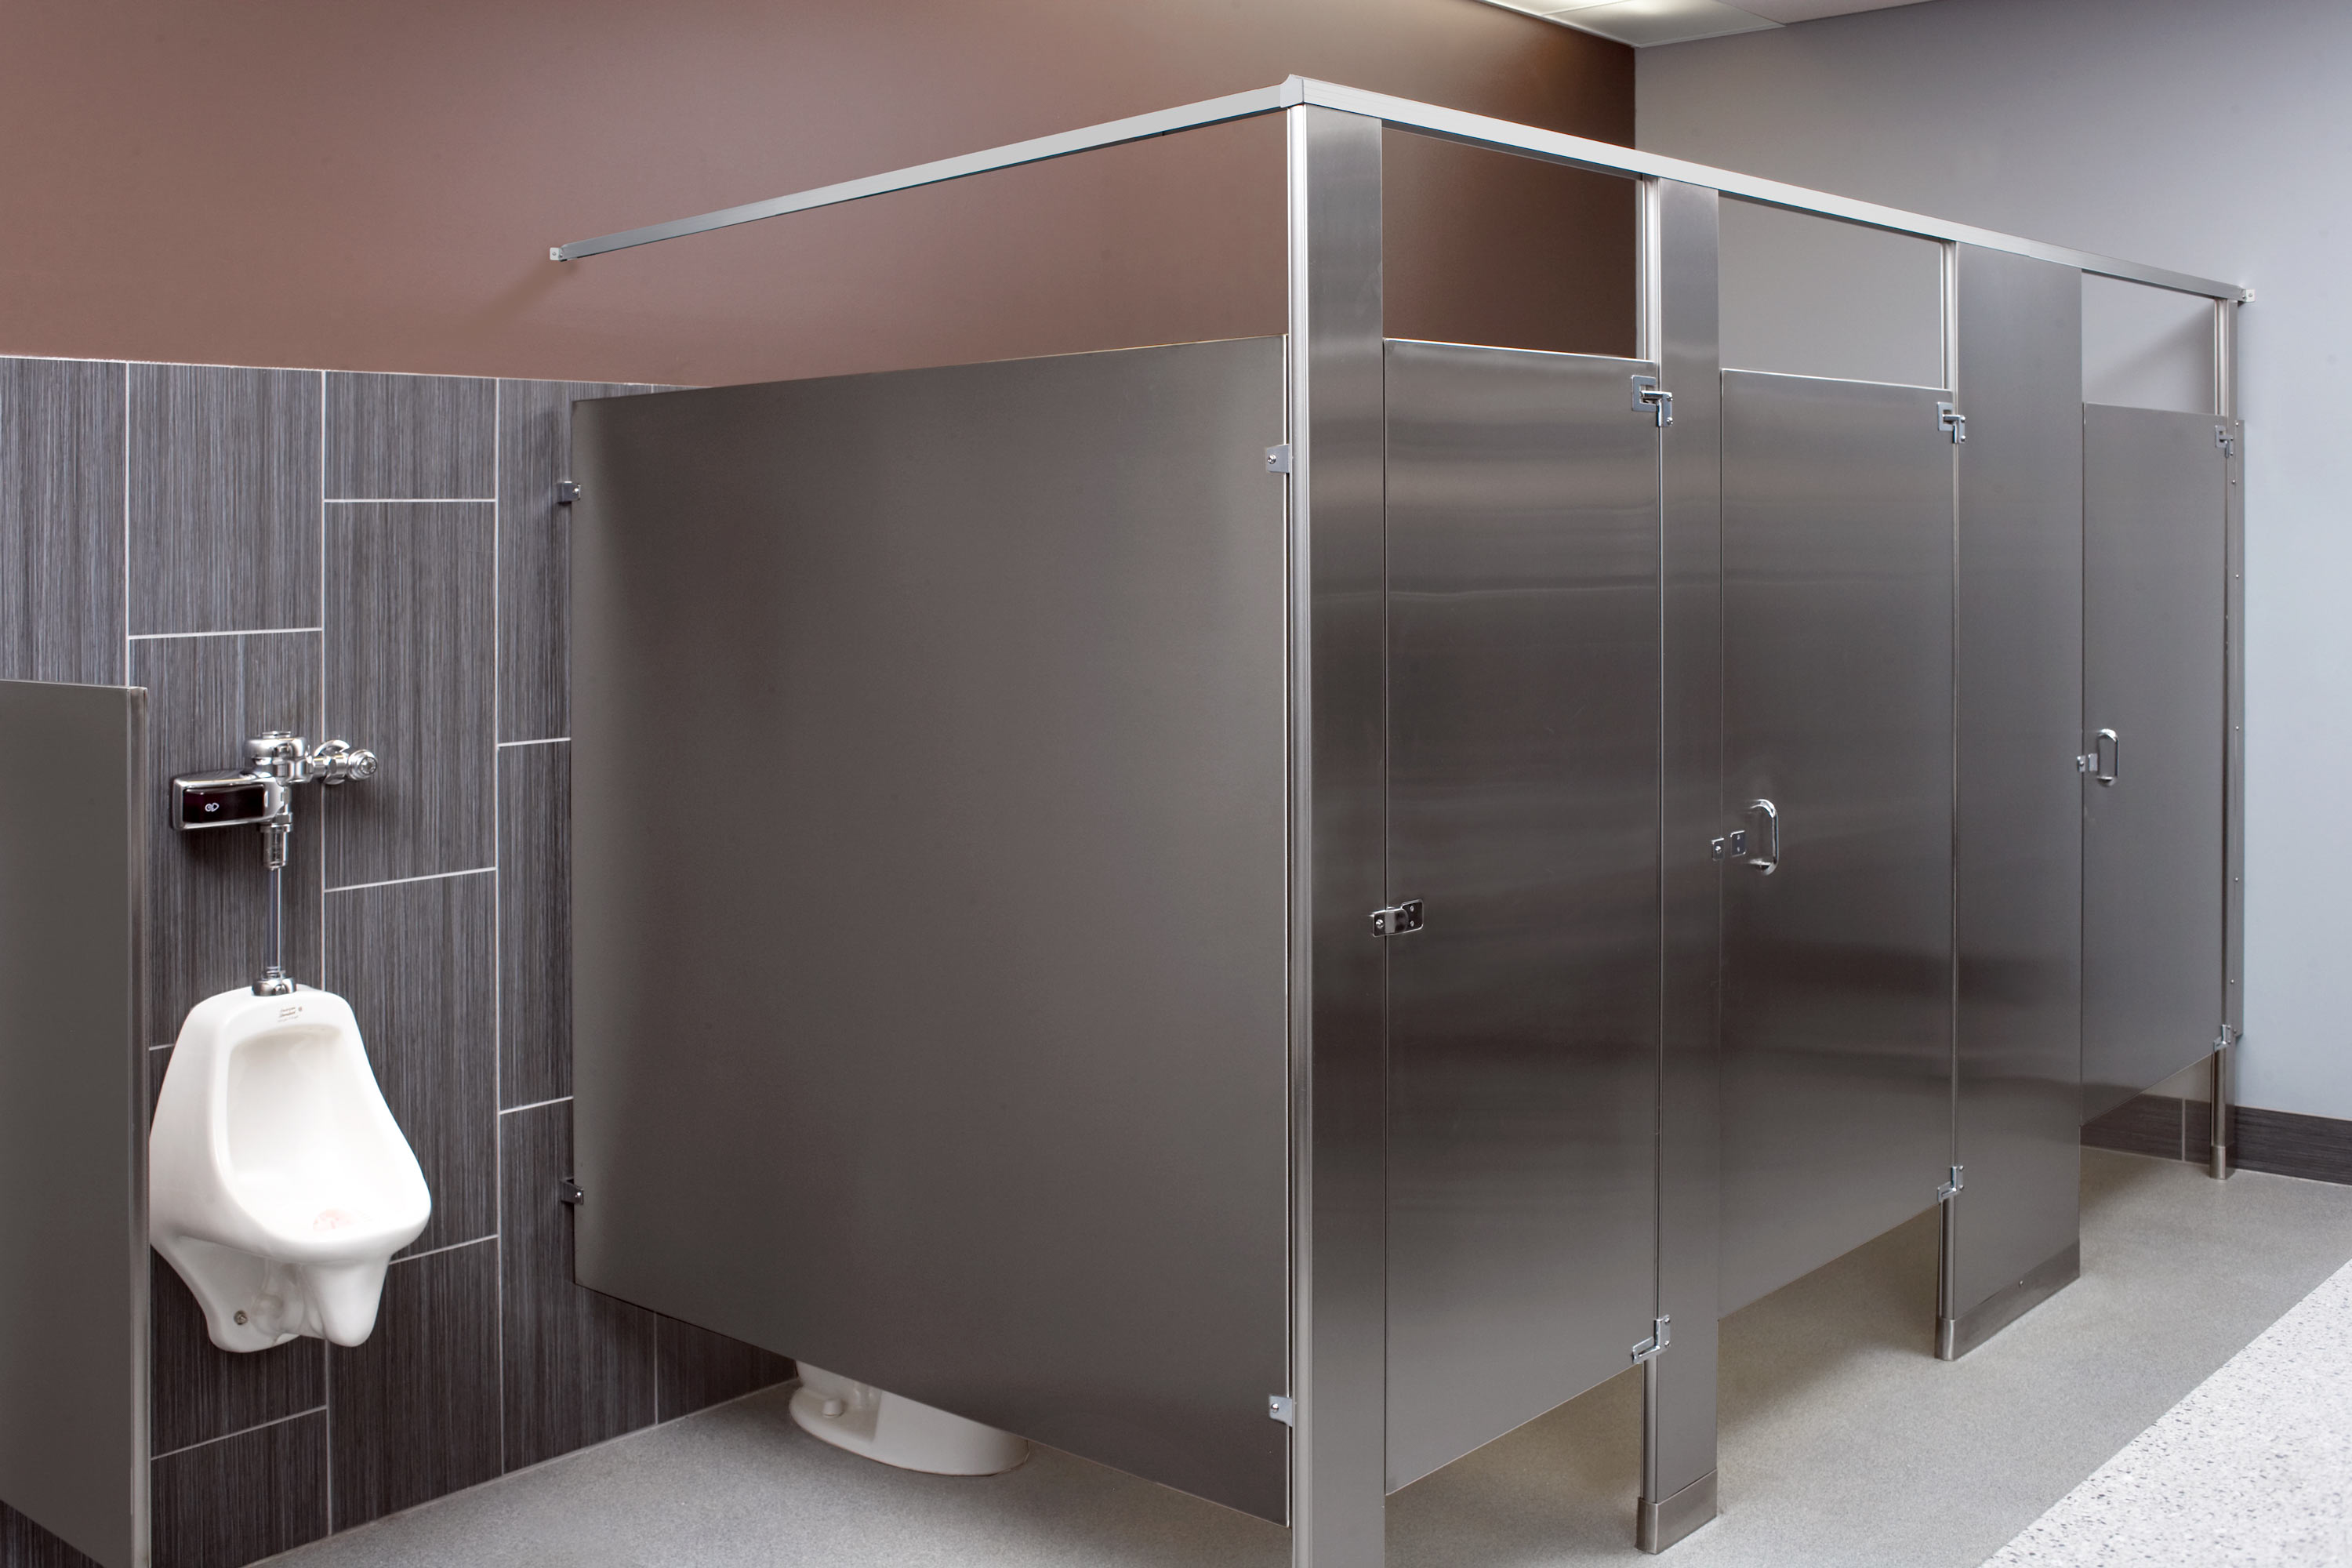 Contemporary restroom with stainless steel partitions and a urinal,